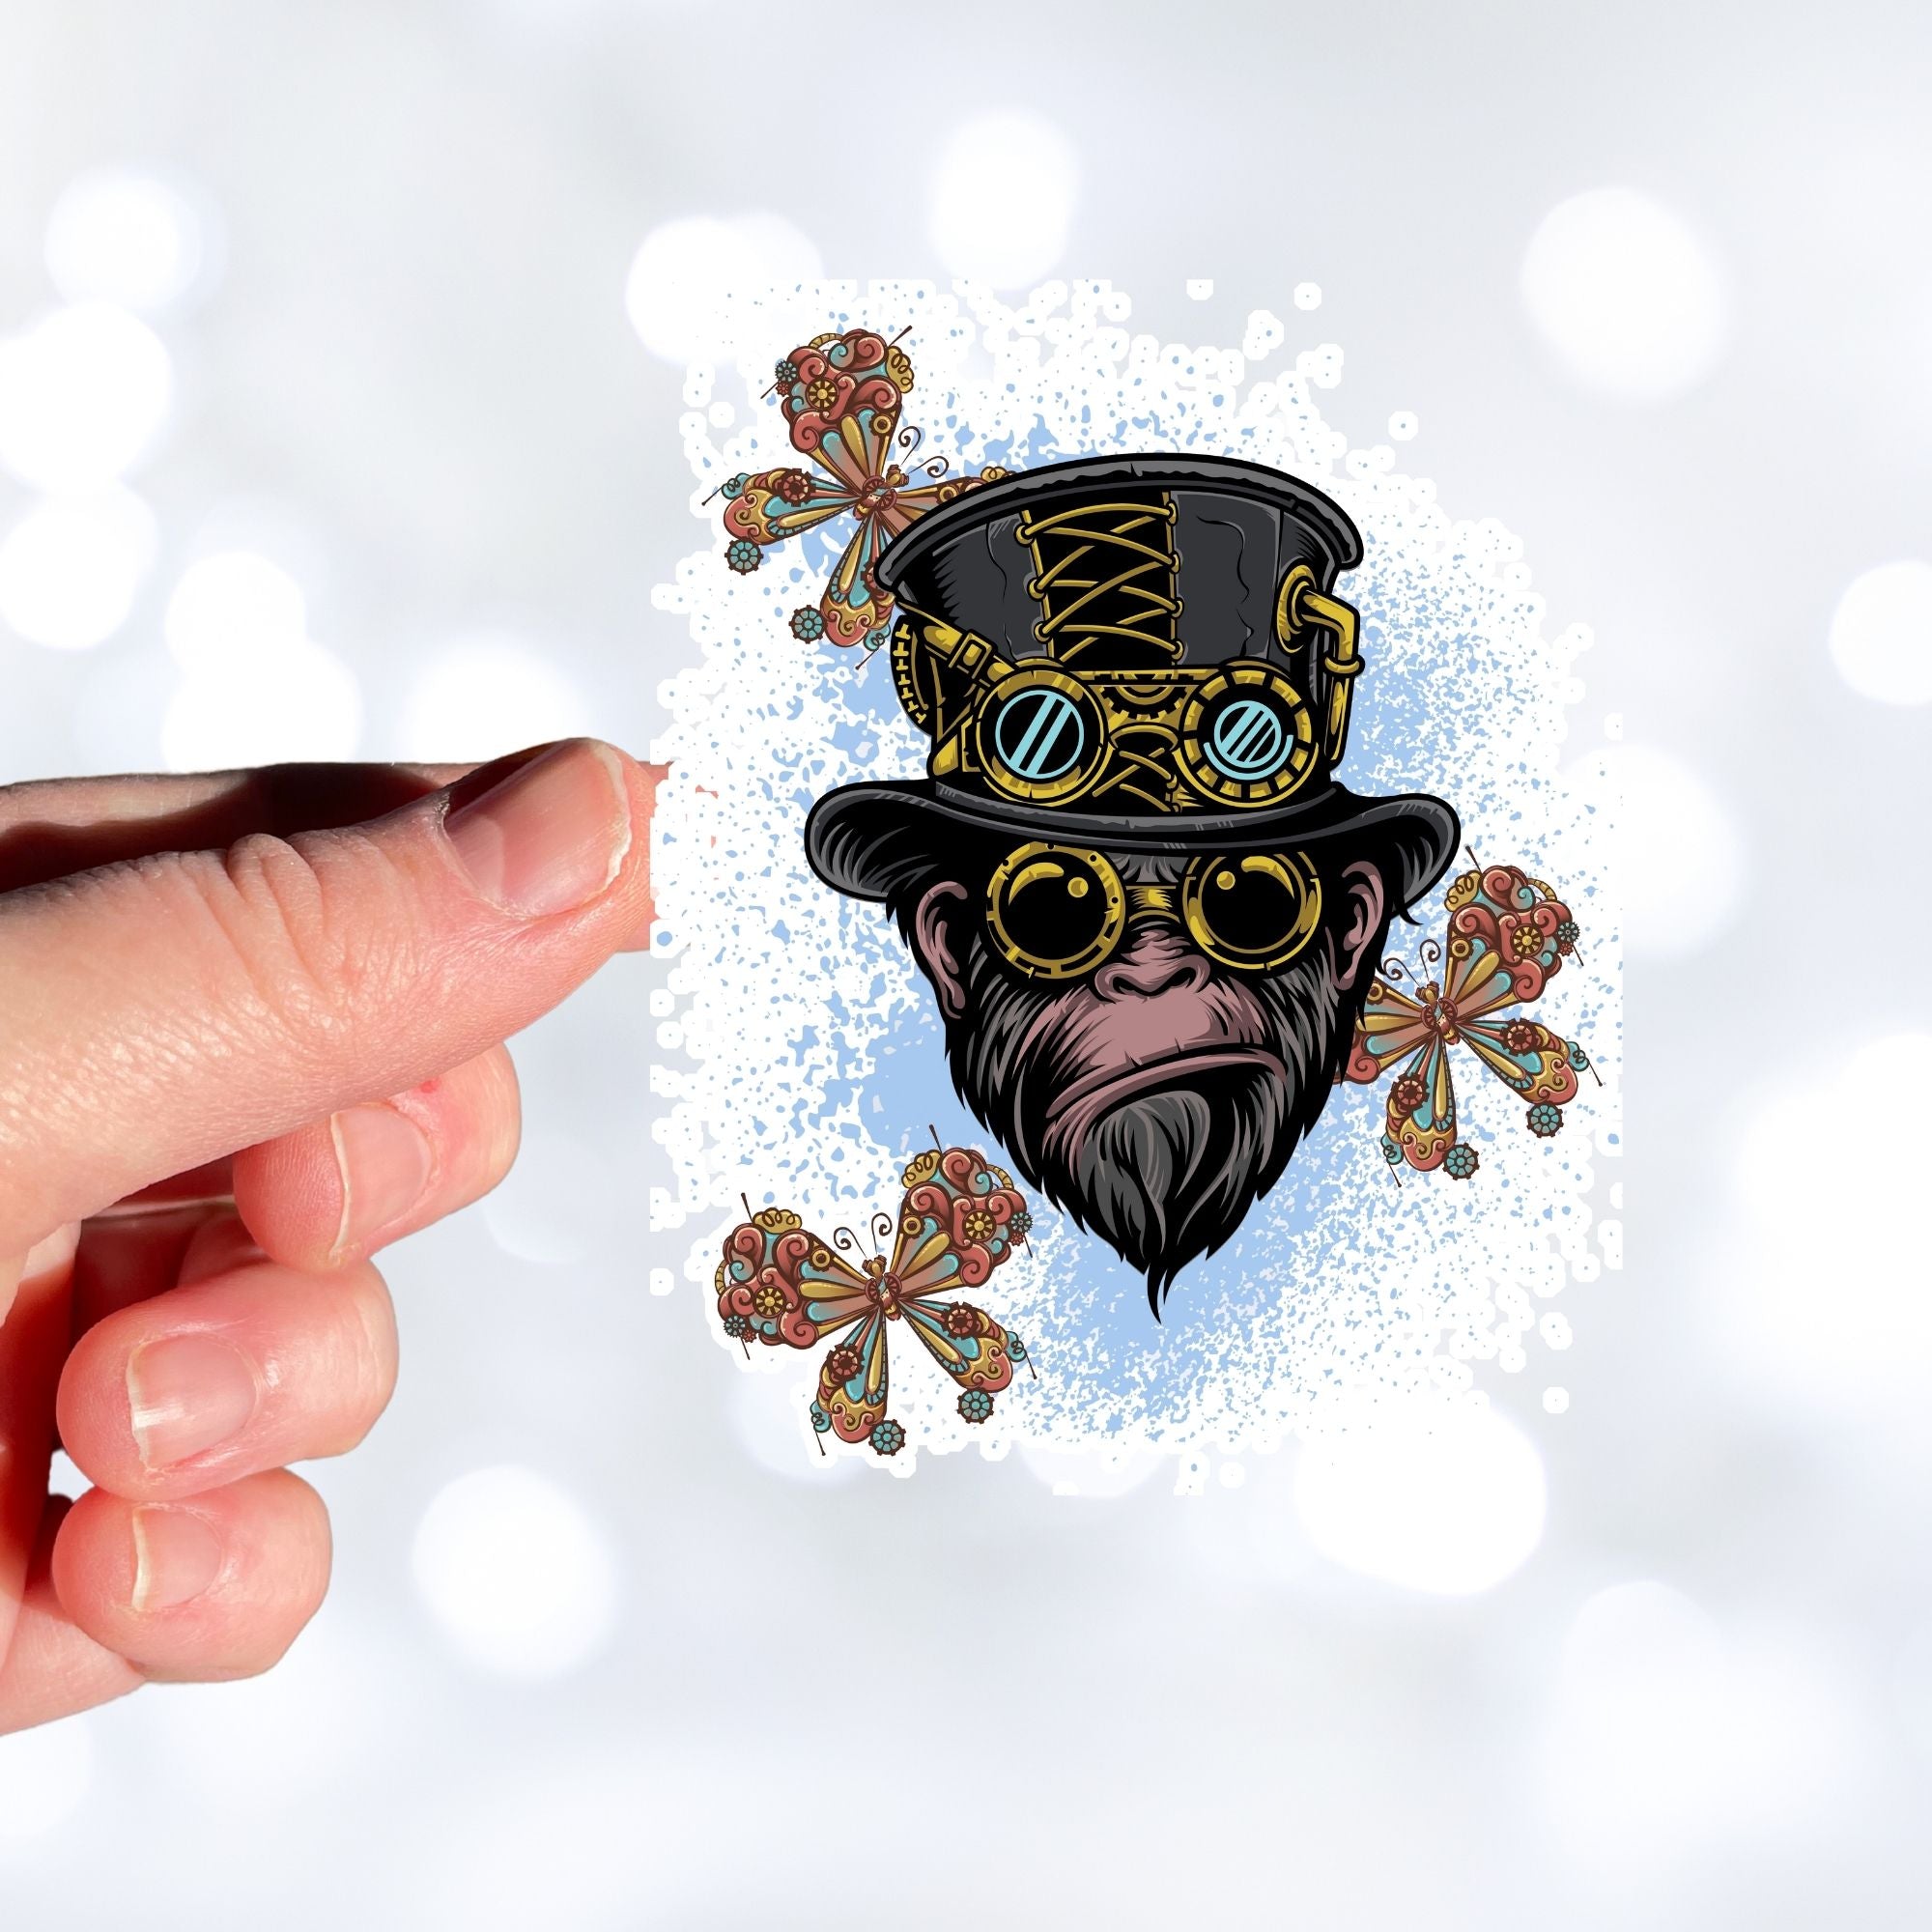 Steampunk Monkey has his own version of a steampunk hat and goggles, plus he is wearing goggles and surrounded by three steampunk butterflies. All on a blue and white background. This image shows a hand holding the steampunk monkey sticker.